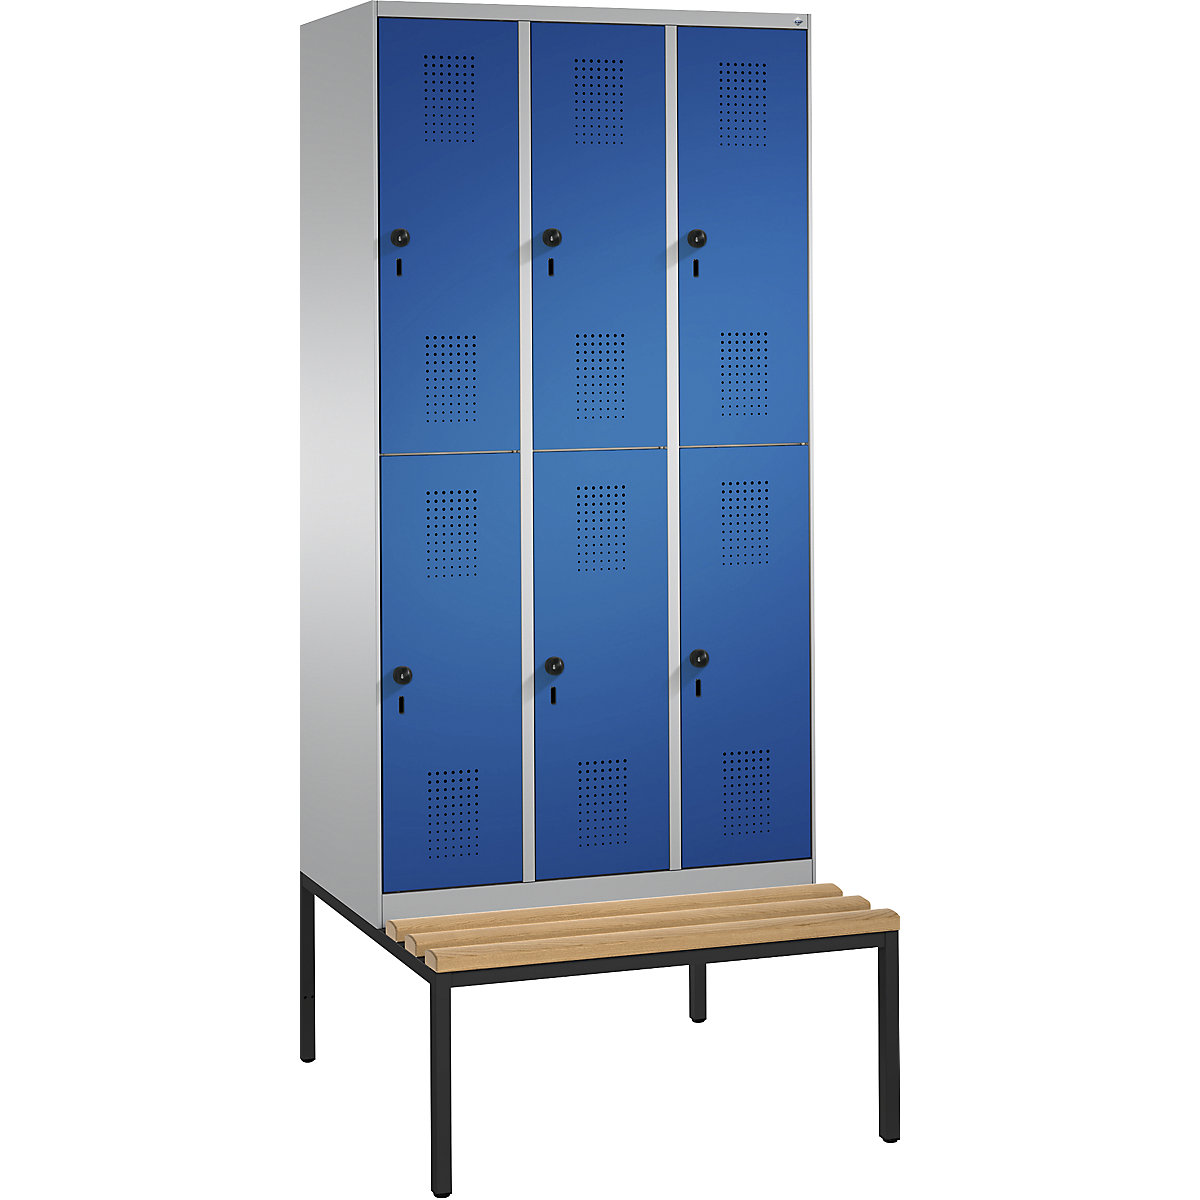 EVOLO cloakroom locker, double tier, with bench – C+P, 3 compartments, 2 shelf compartments each, compartment width 300 mm, white aluminium / gentian blue-9